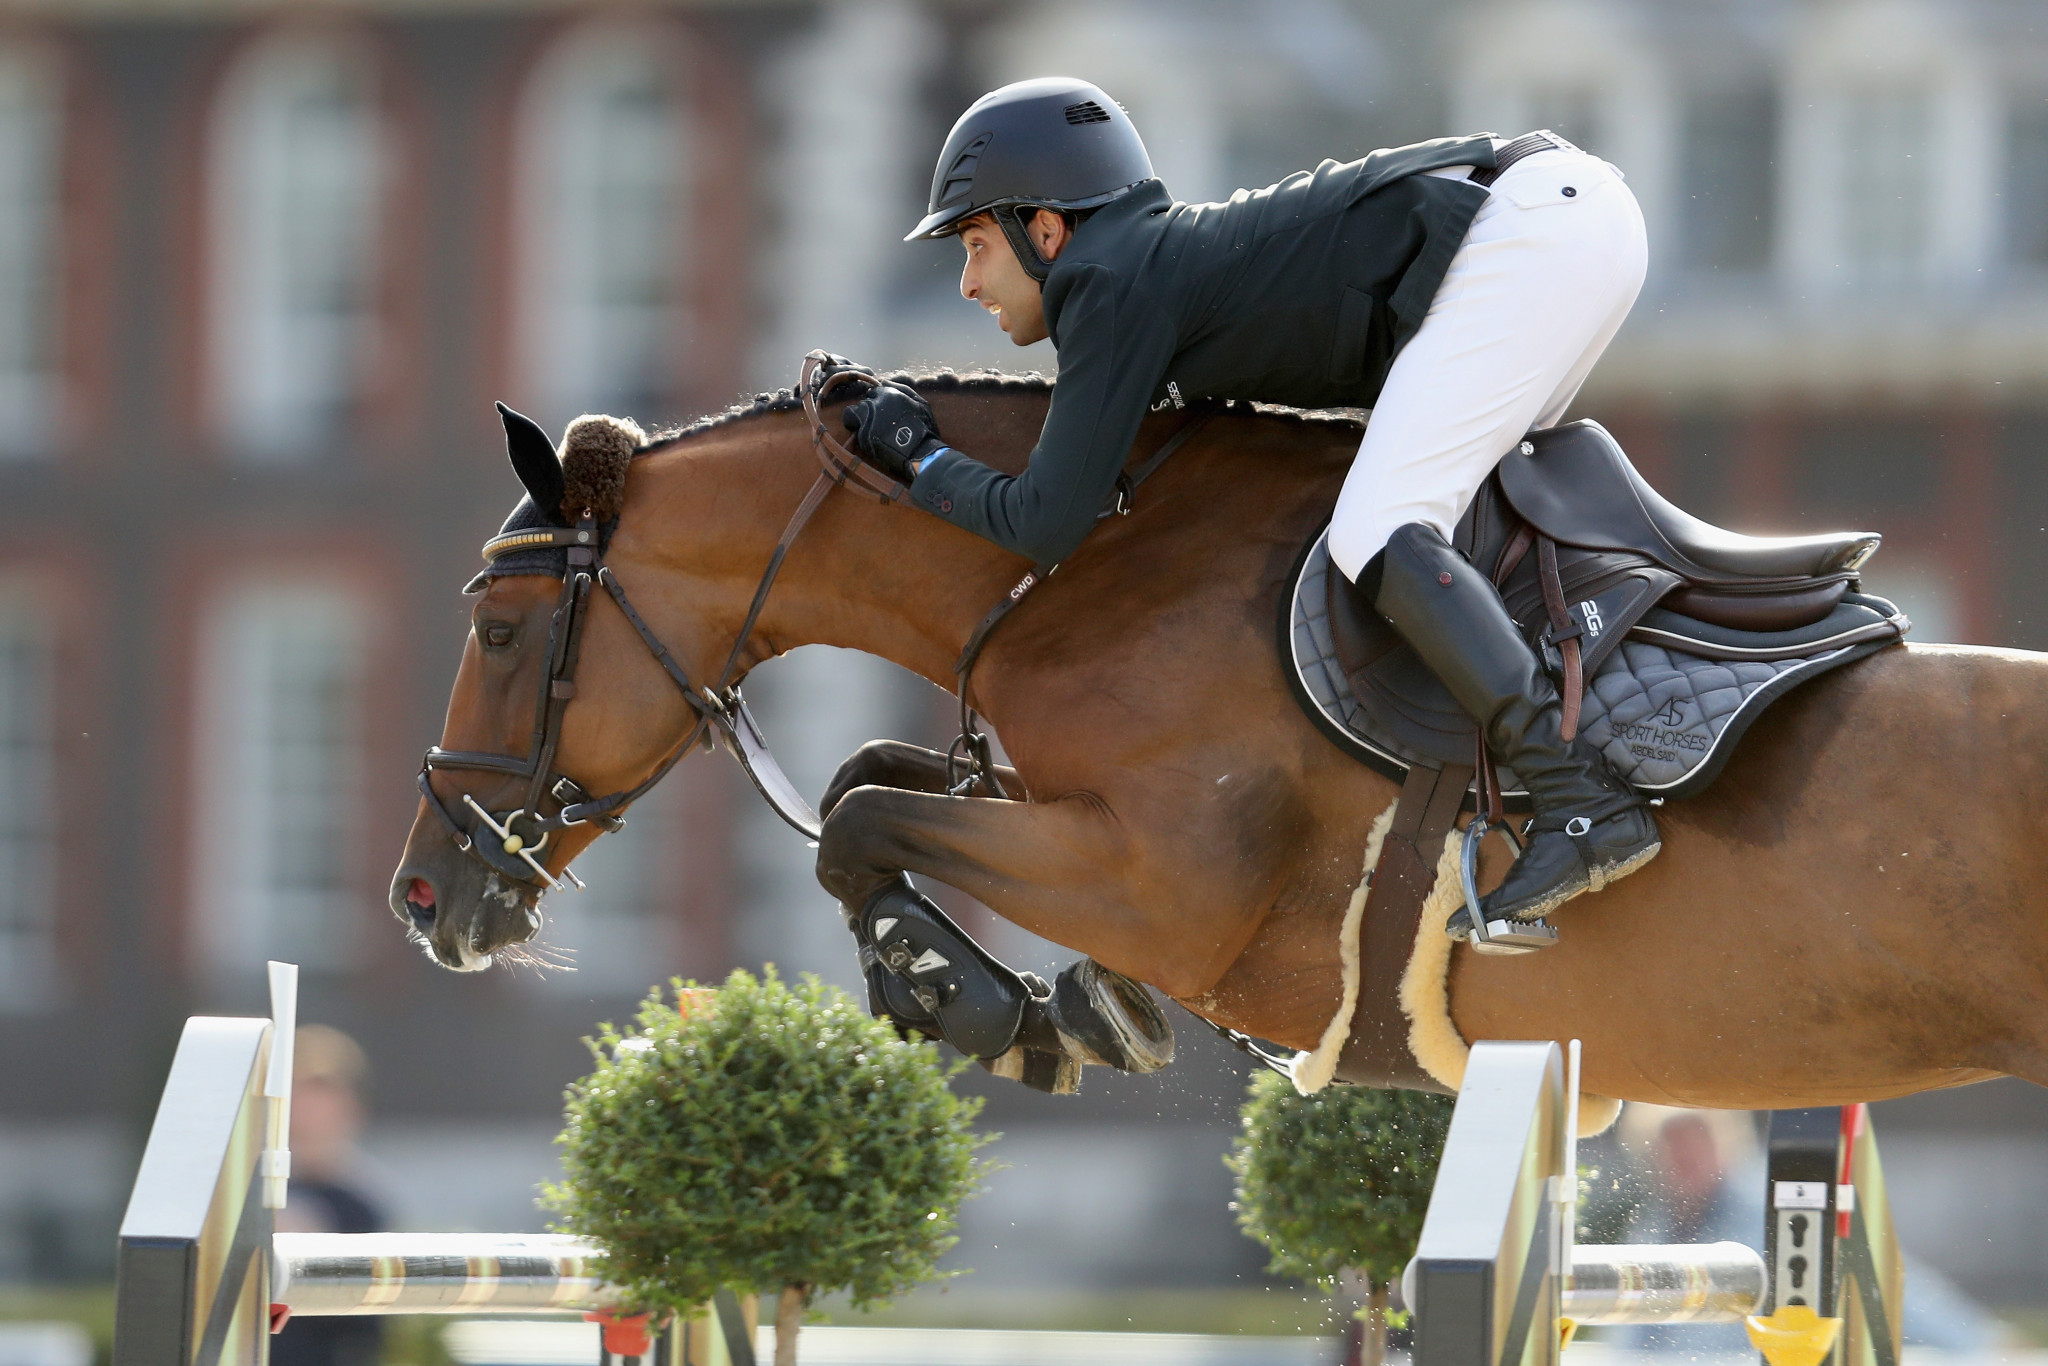 Egypt's Abdel Saïd finished second at the Longines Global Champions Tour in Mexico City ©Getty Images